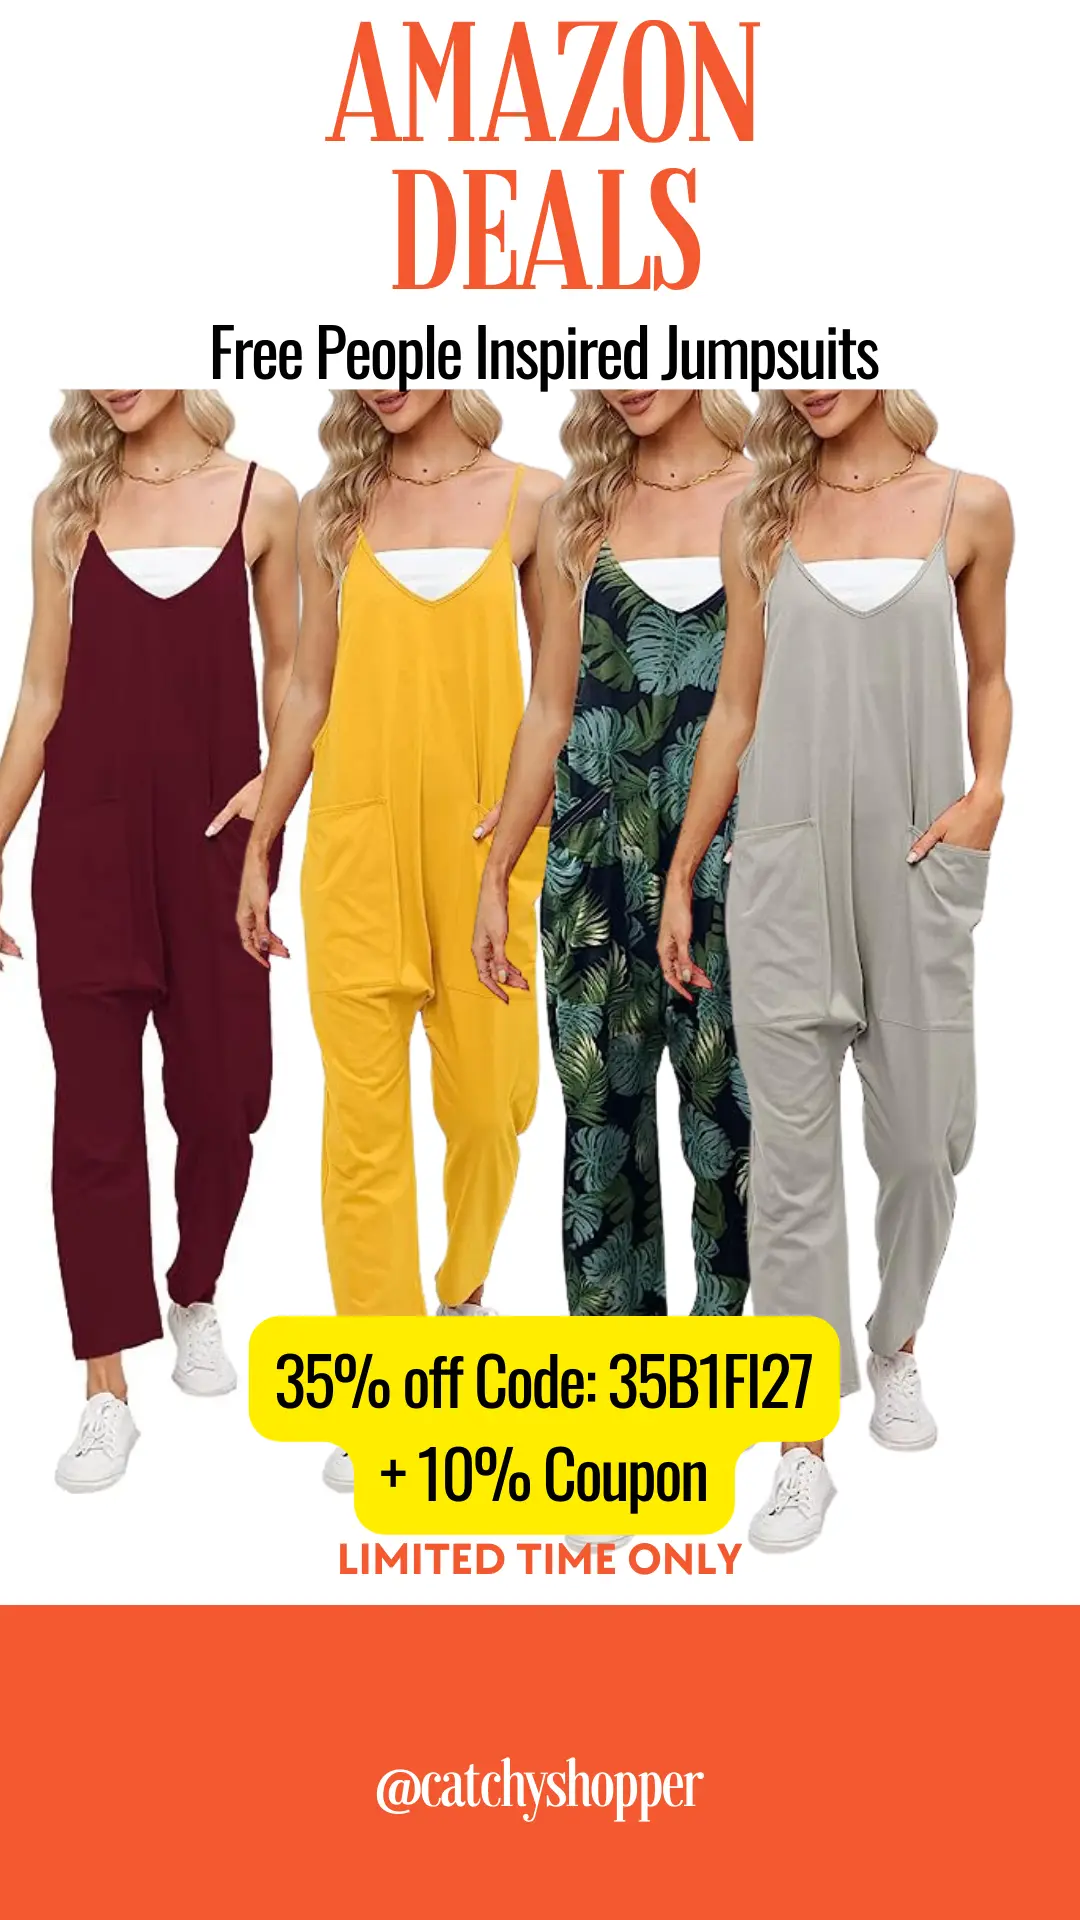 Free People-Inspired Jumpsuits